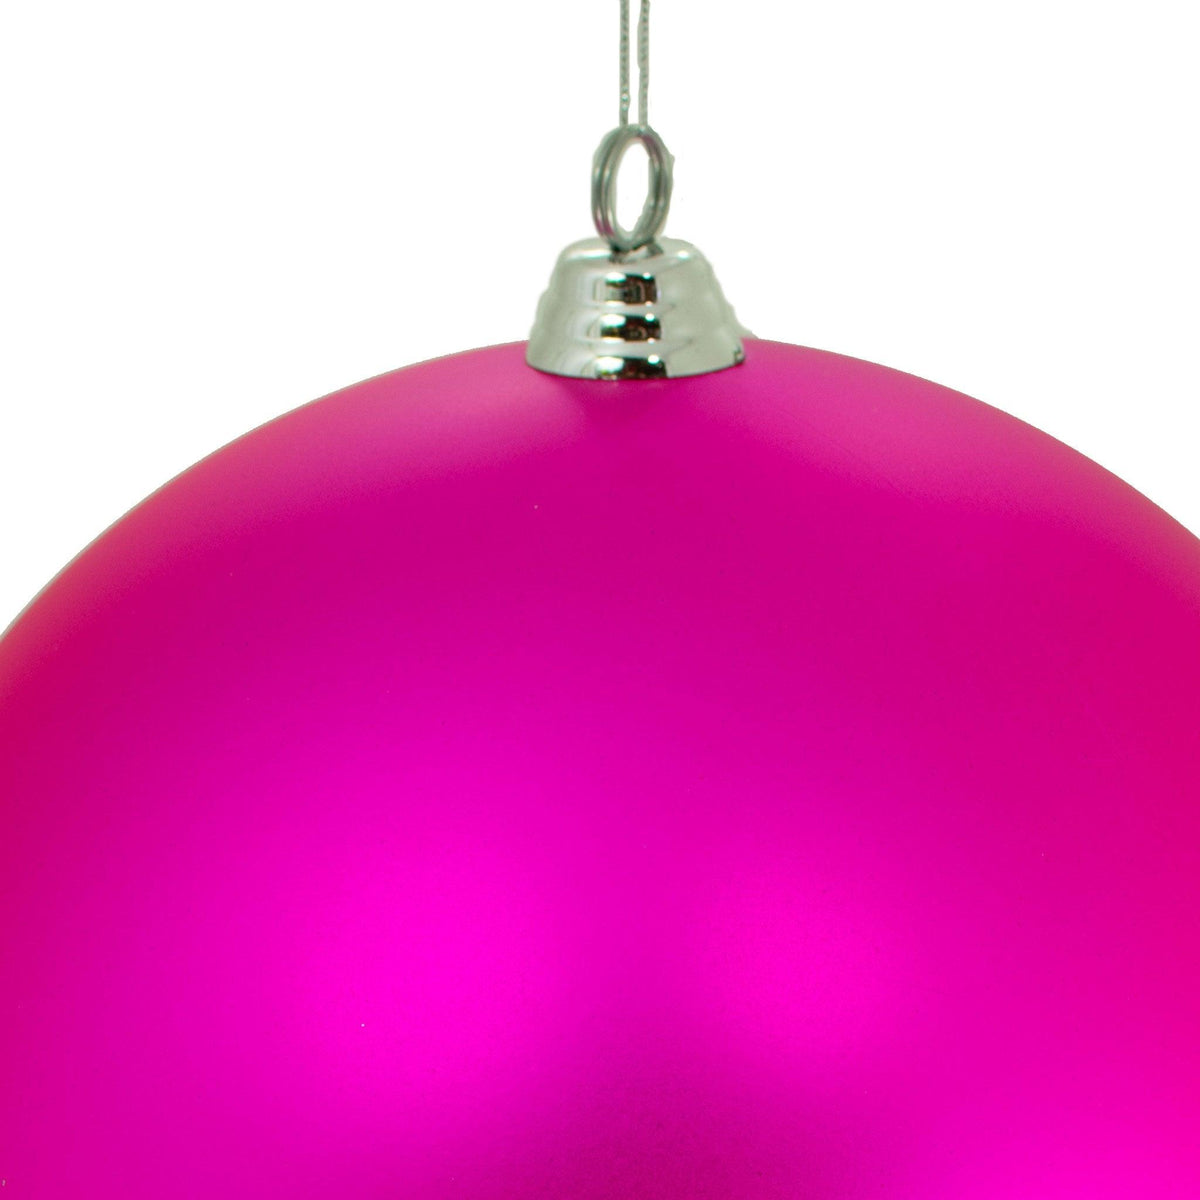 Top of the ball ornament with a silver plastic cap and silver hanging string